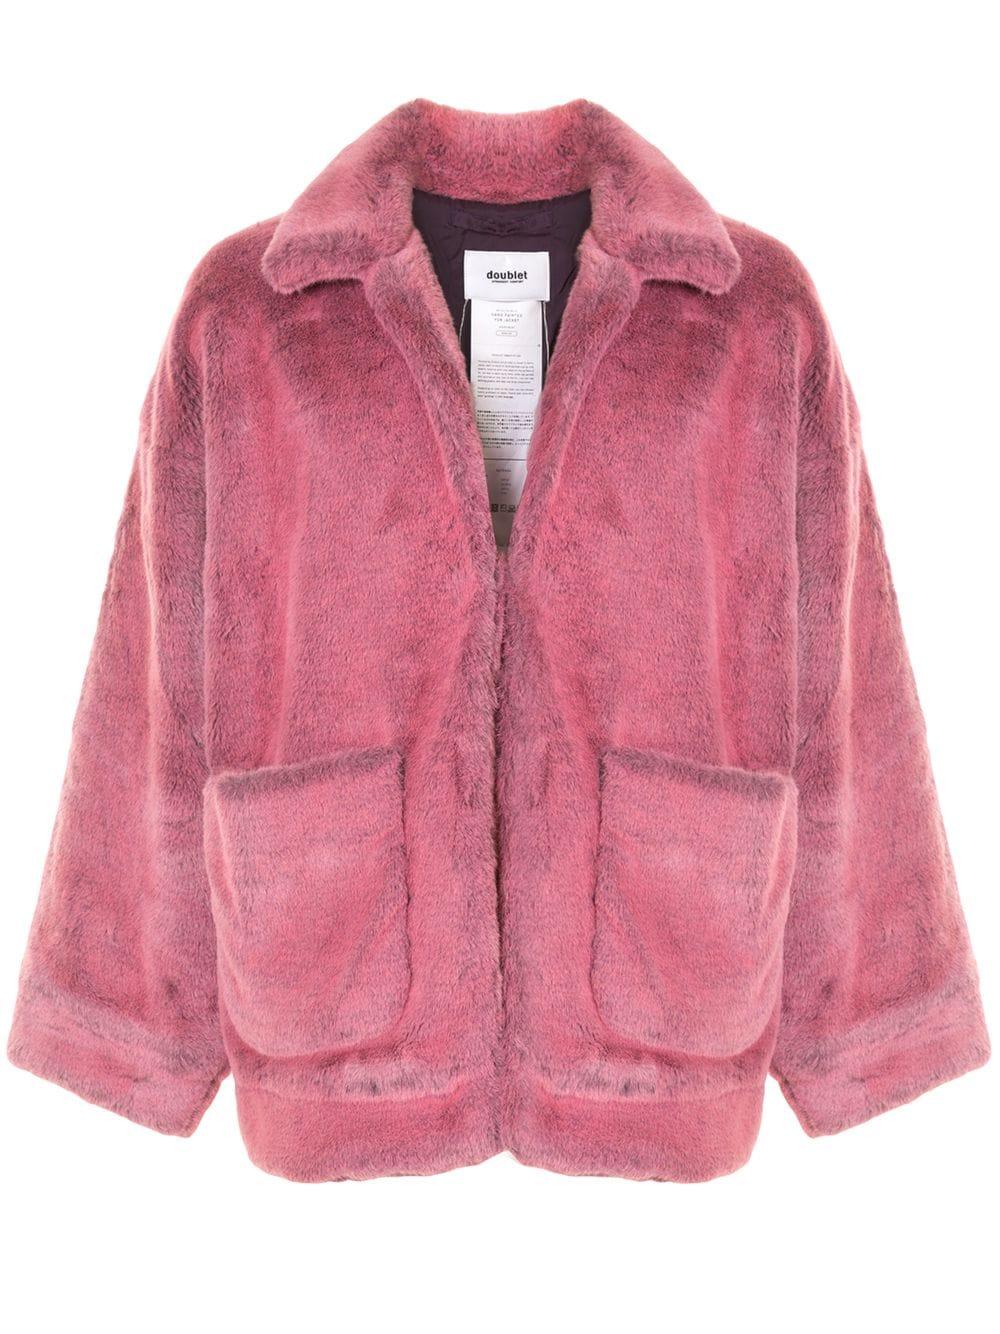 Doublet Hand Painted Faux-fur Jacket in Pink for Men | Lyst